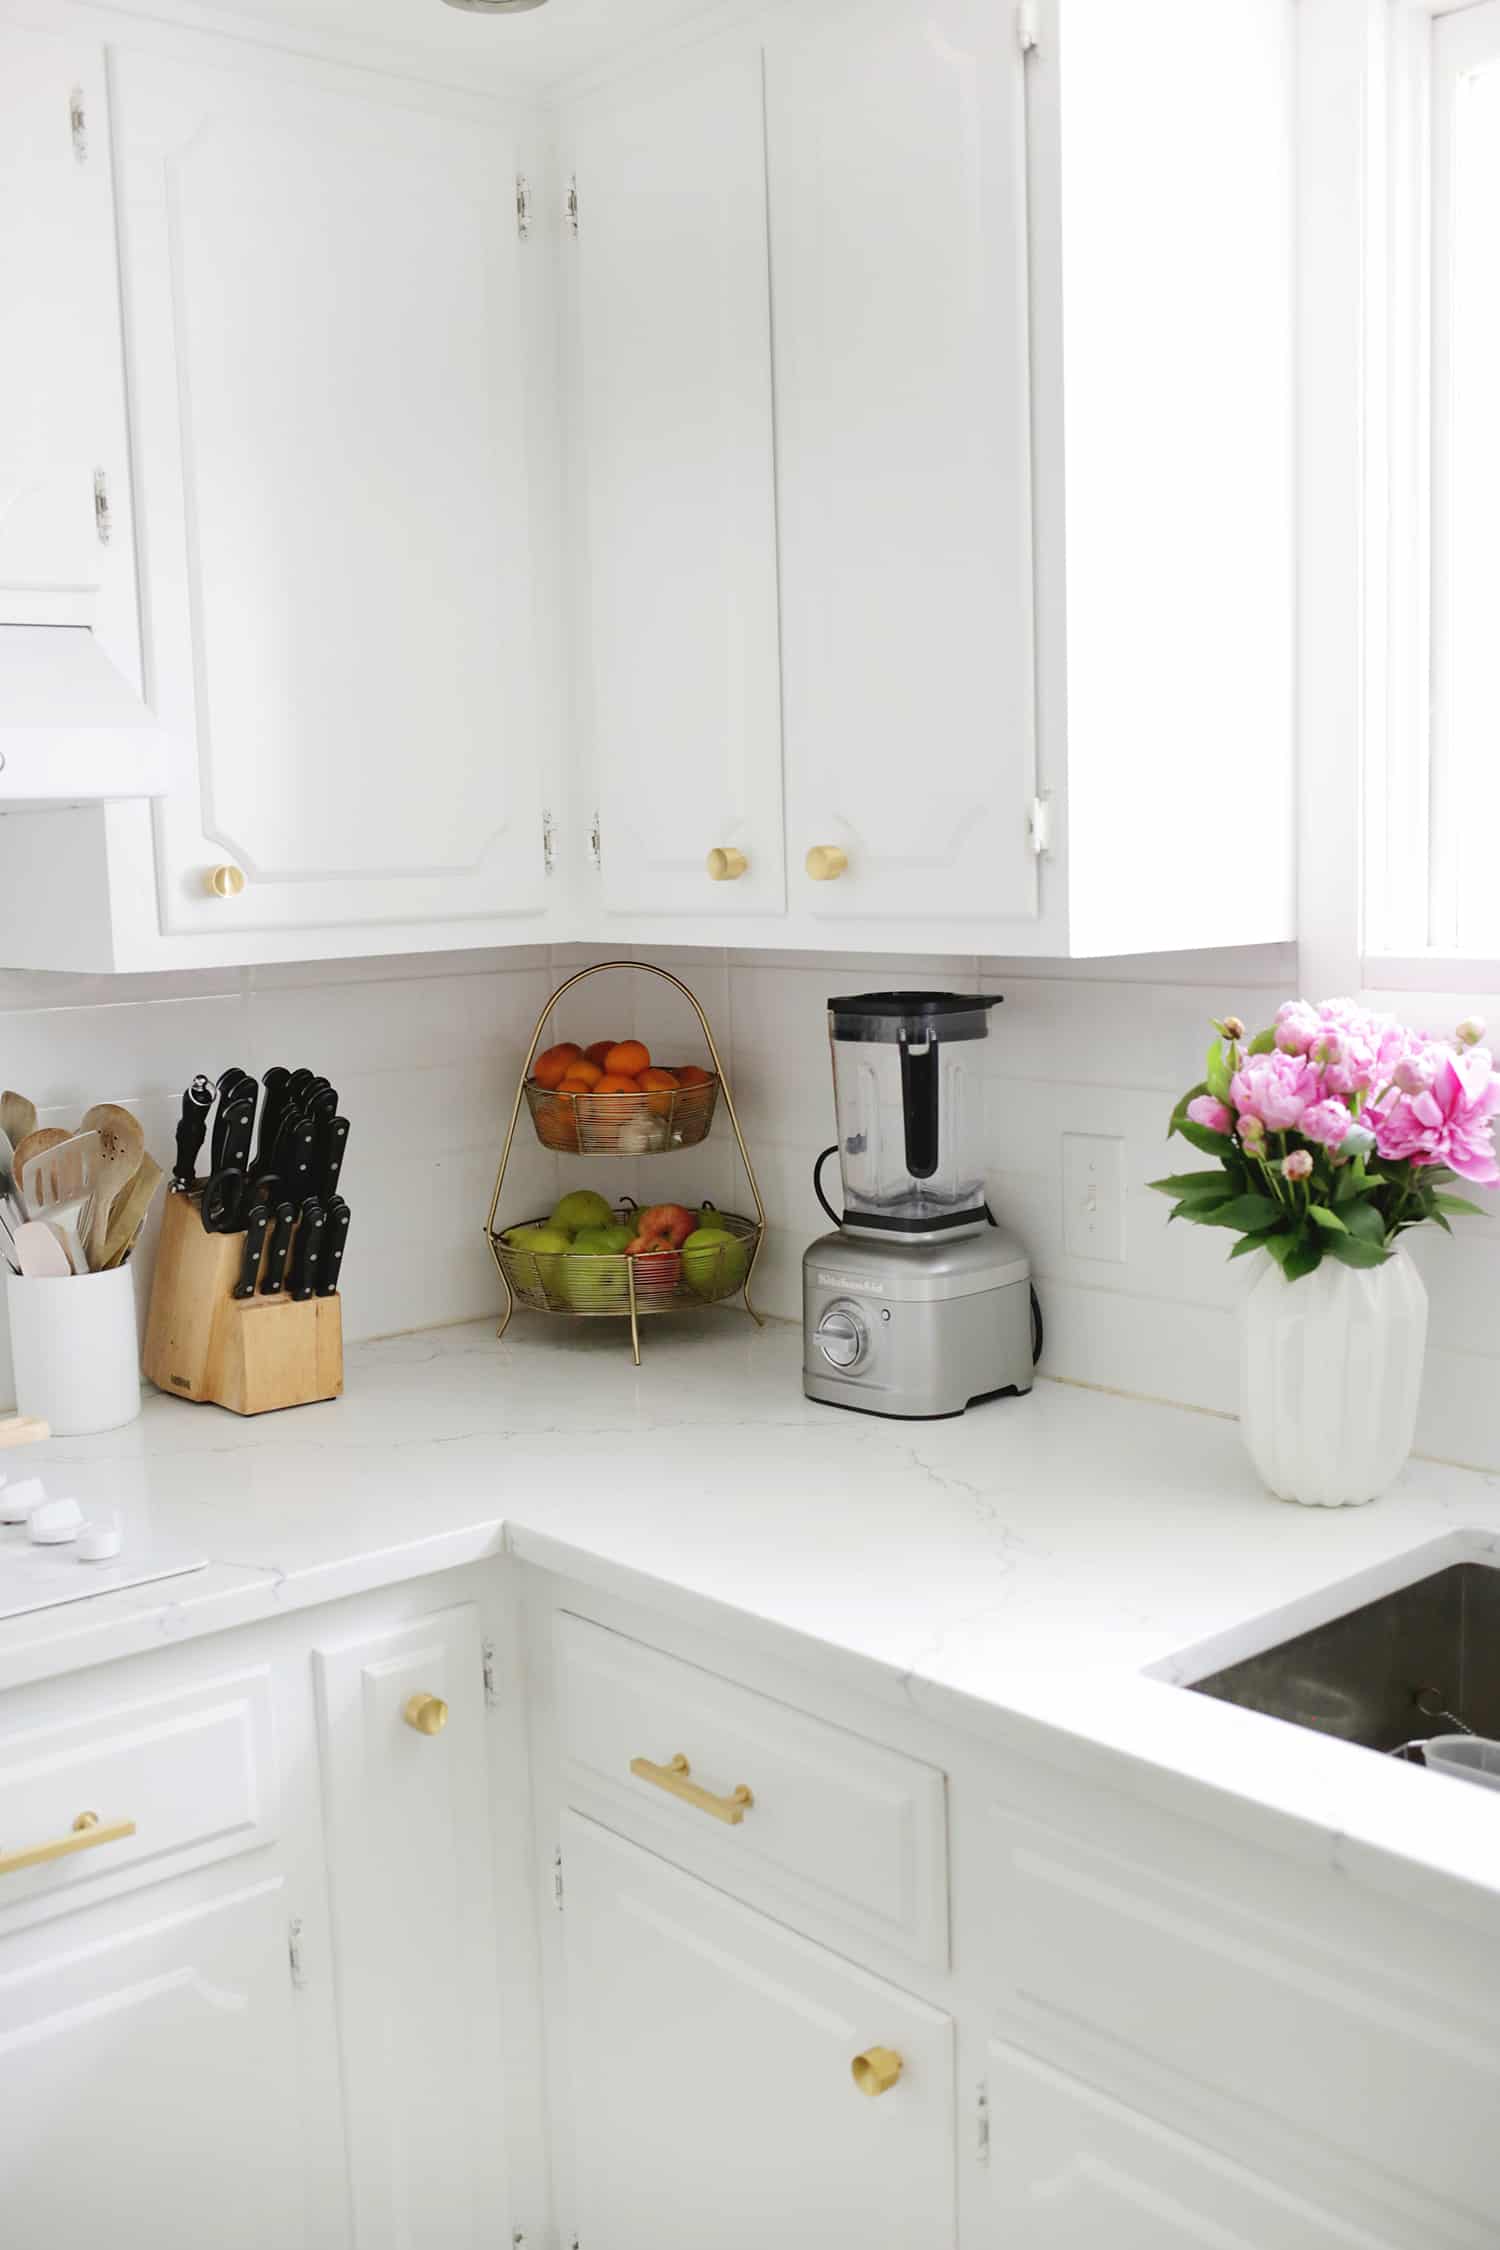 white kitchen with knives, fruit, blender, and flowers in a vase on white countertop